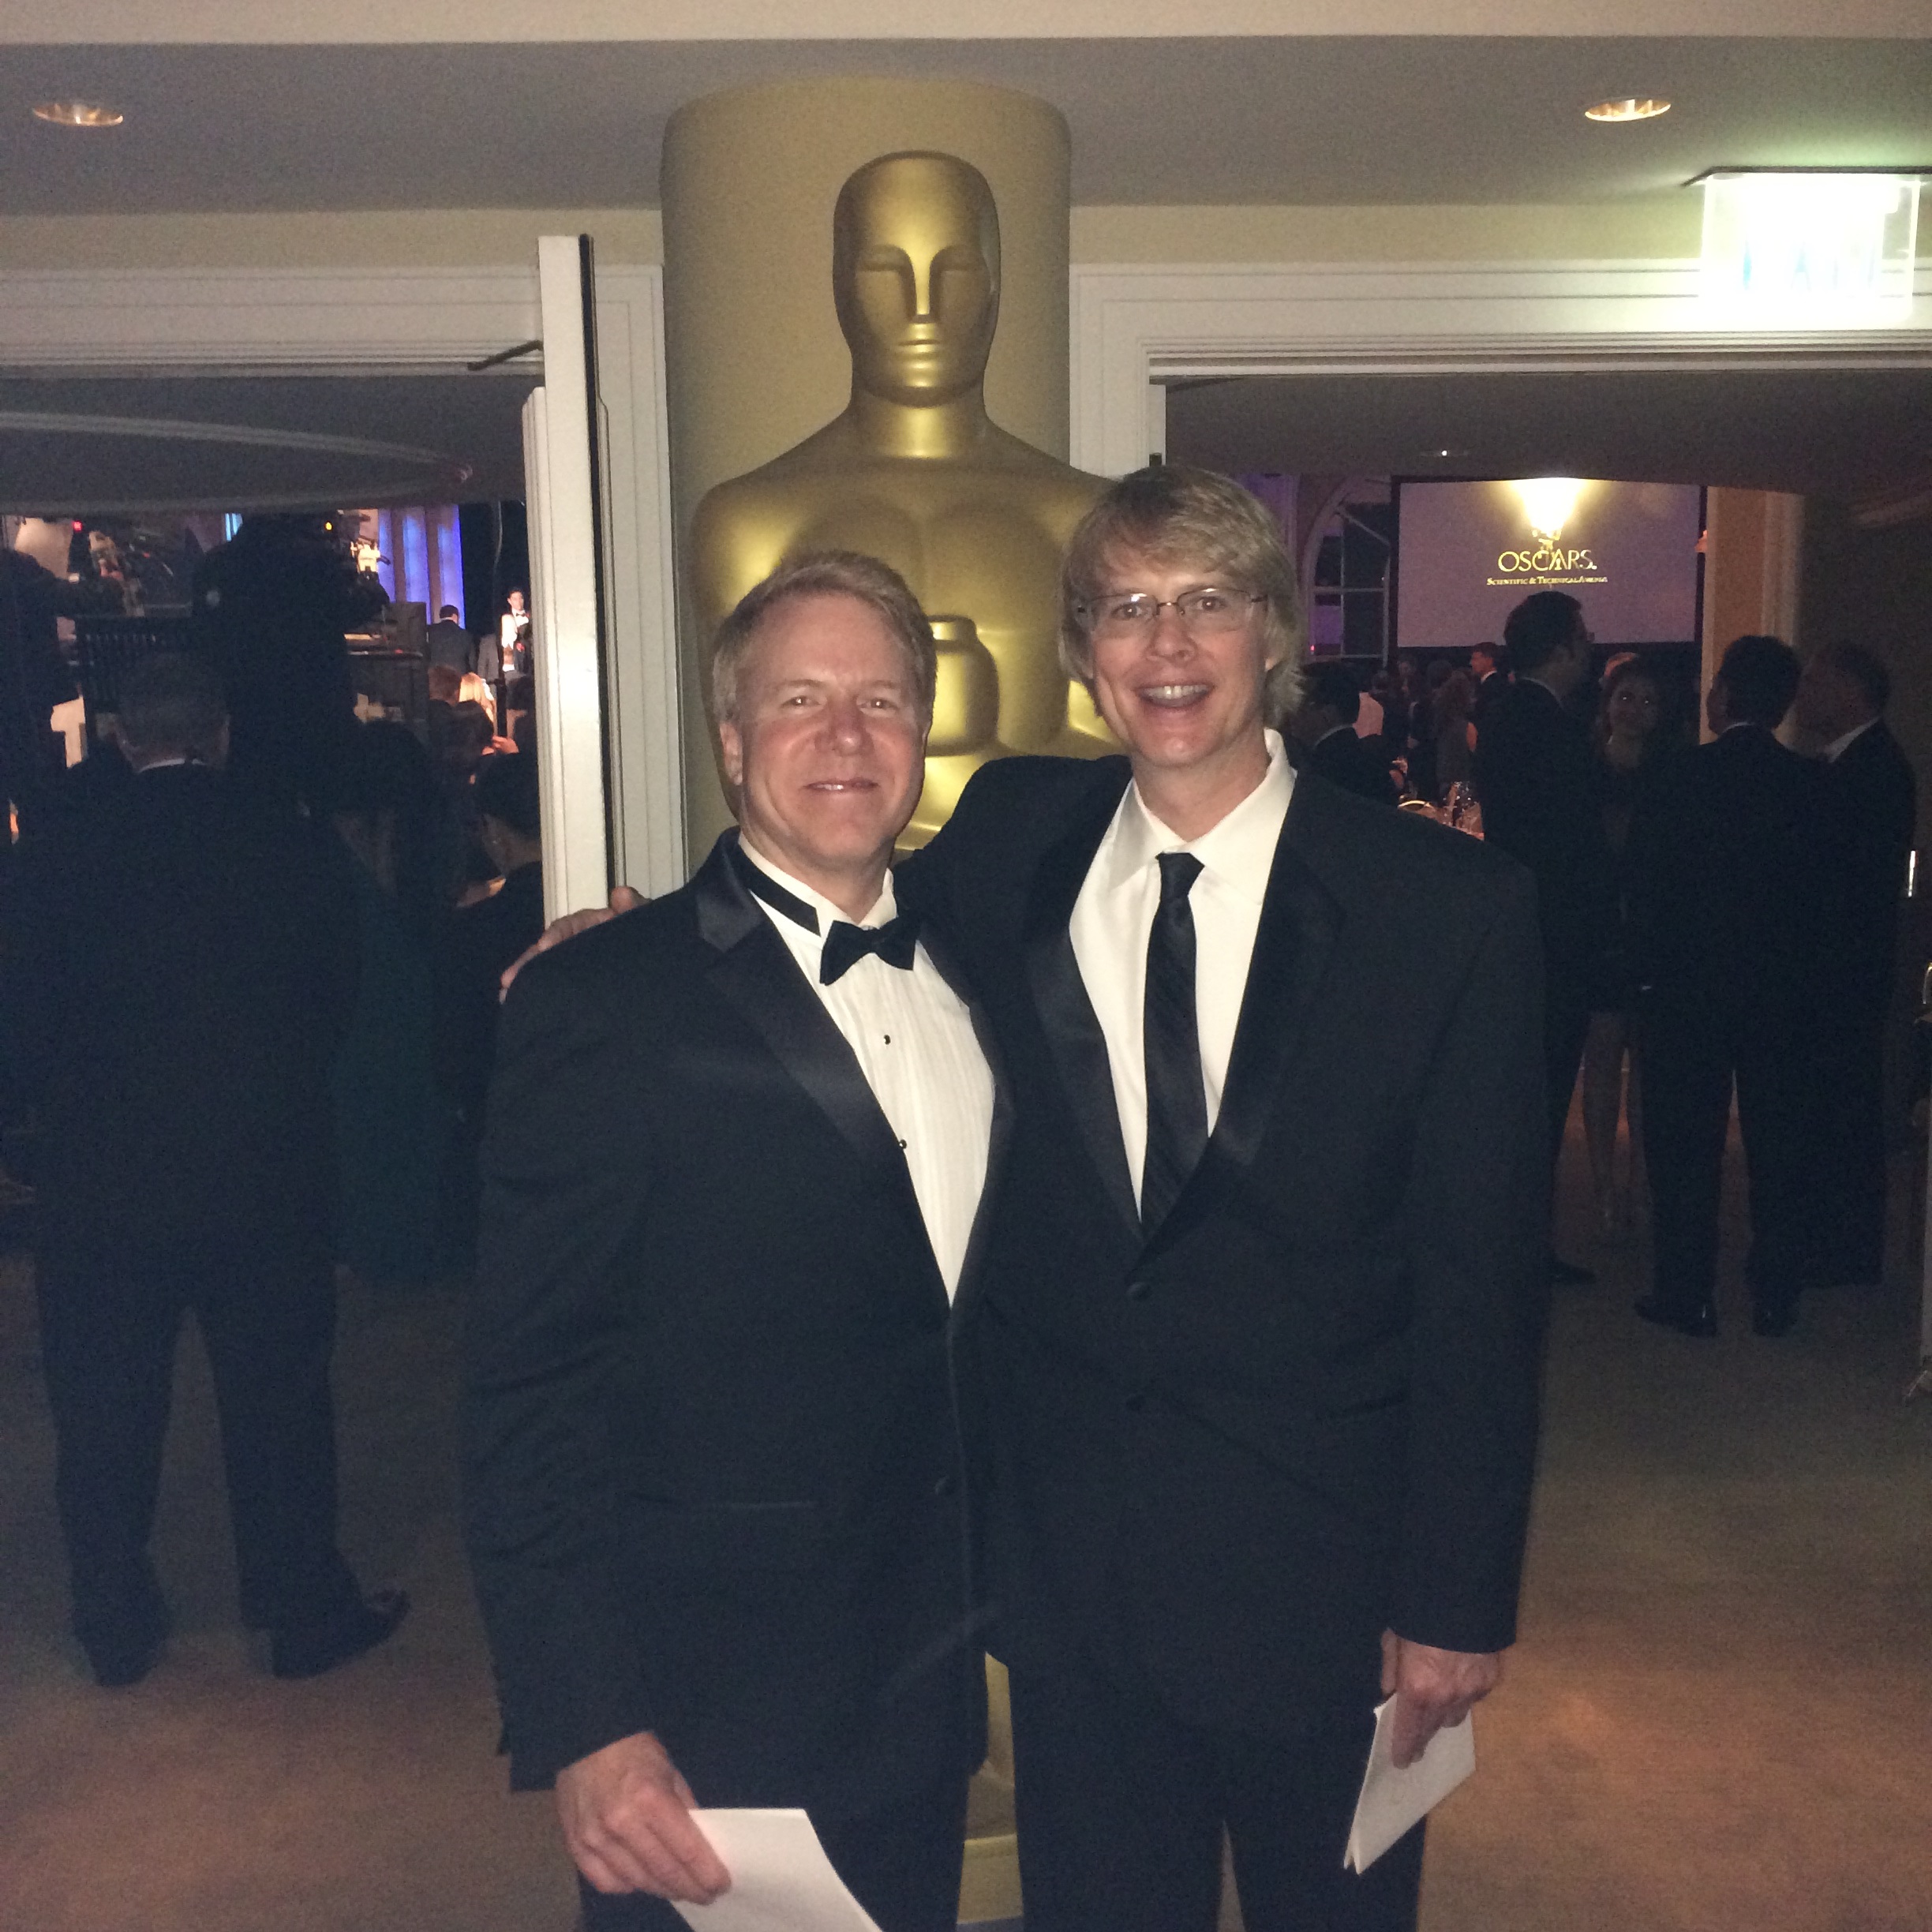 2014 Scientific Academy Awards with Dan Lion in support of the ASC CDL award.